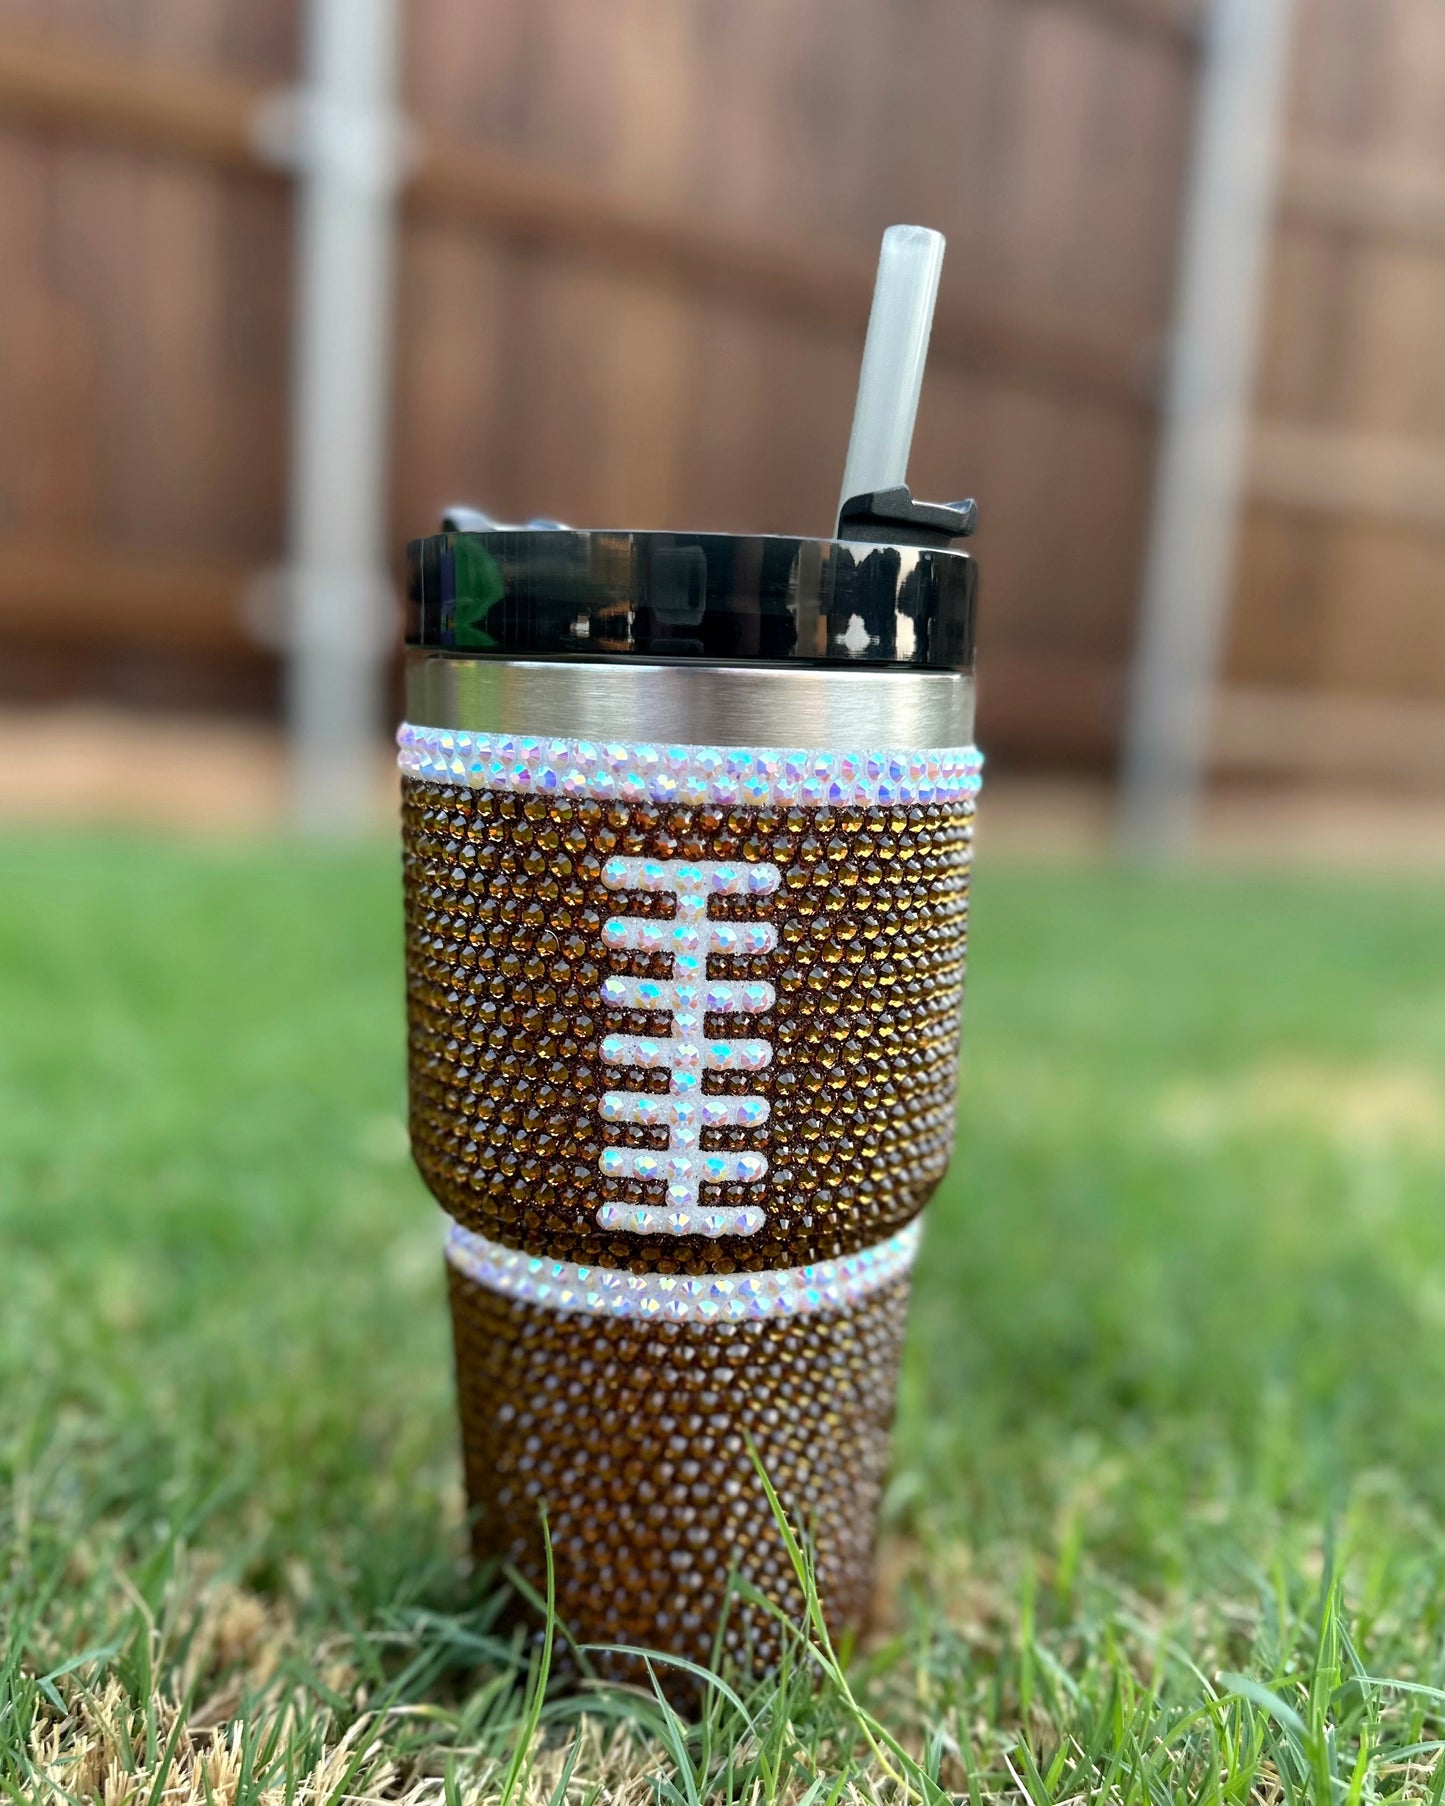 Pre-Order: 20 Oz. Crystal Football "Blinged Out" Tumbler (Ships Approx. 6/15)